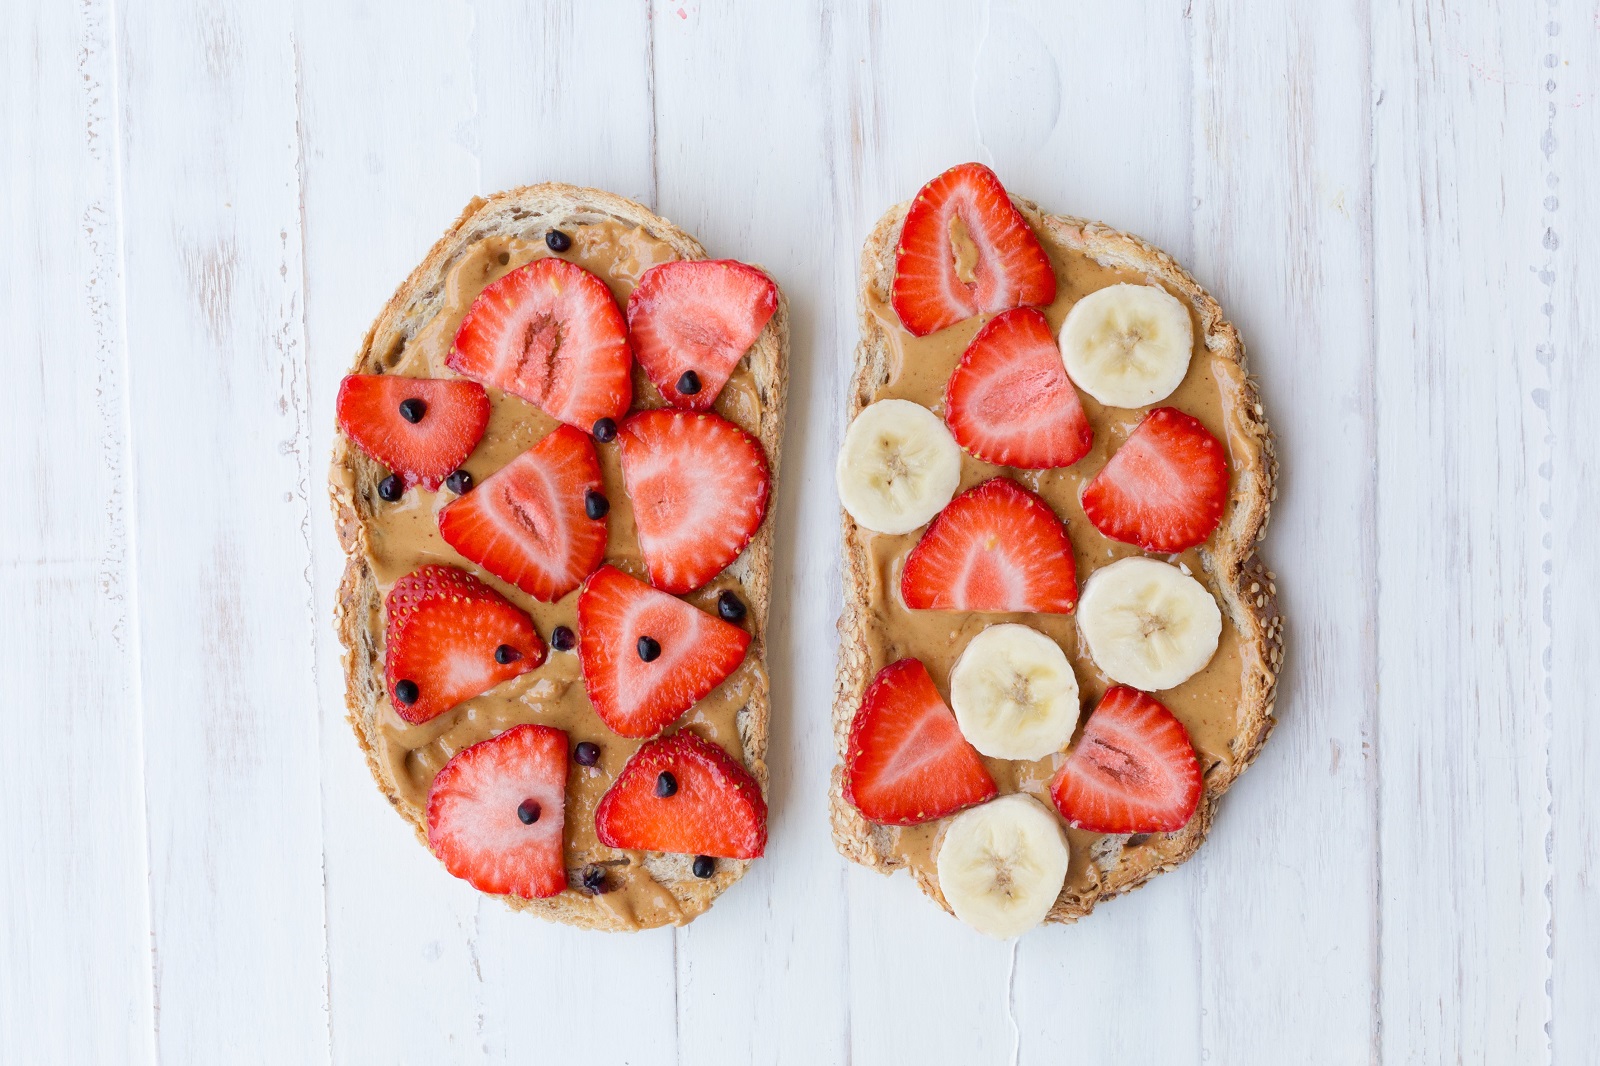 peanut butter toasts with strawberries and cacao nibs